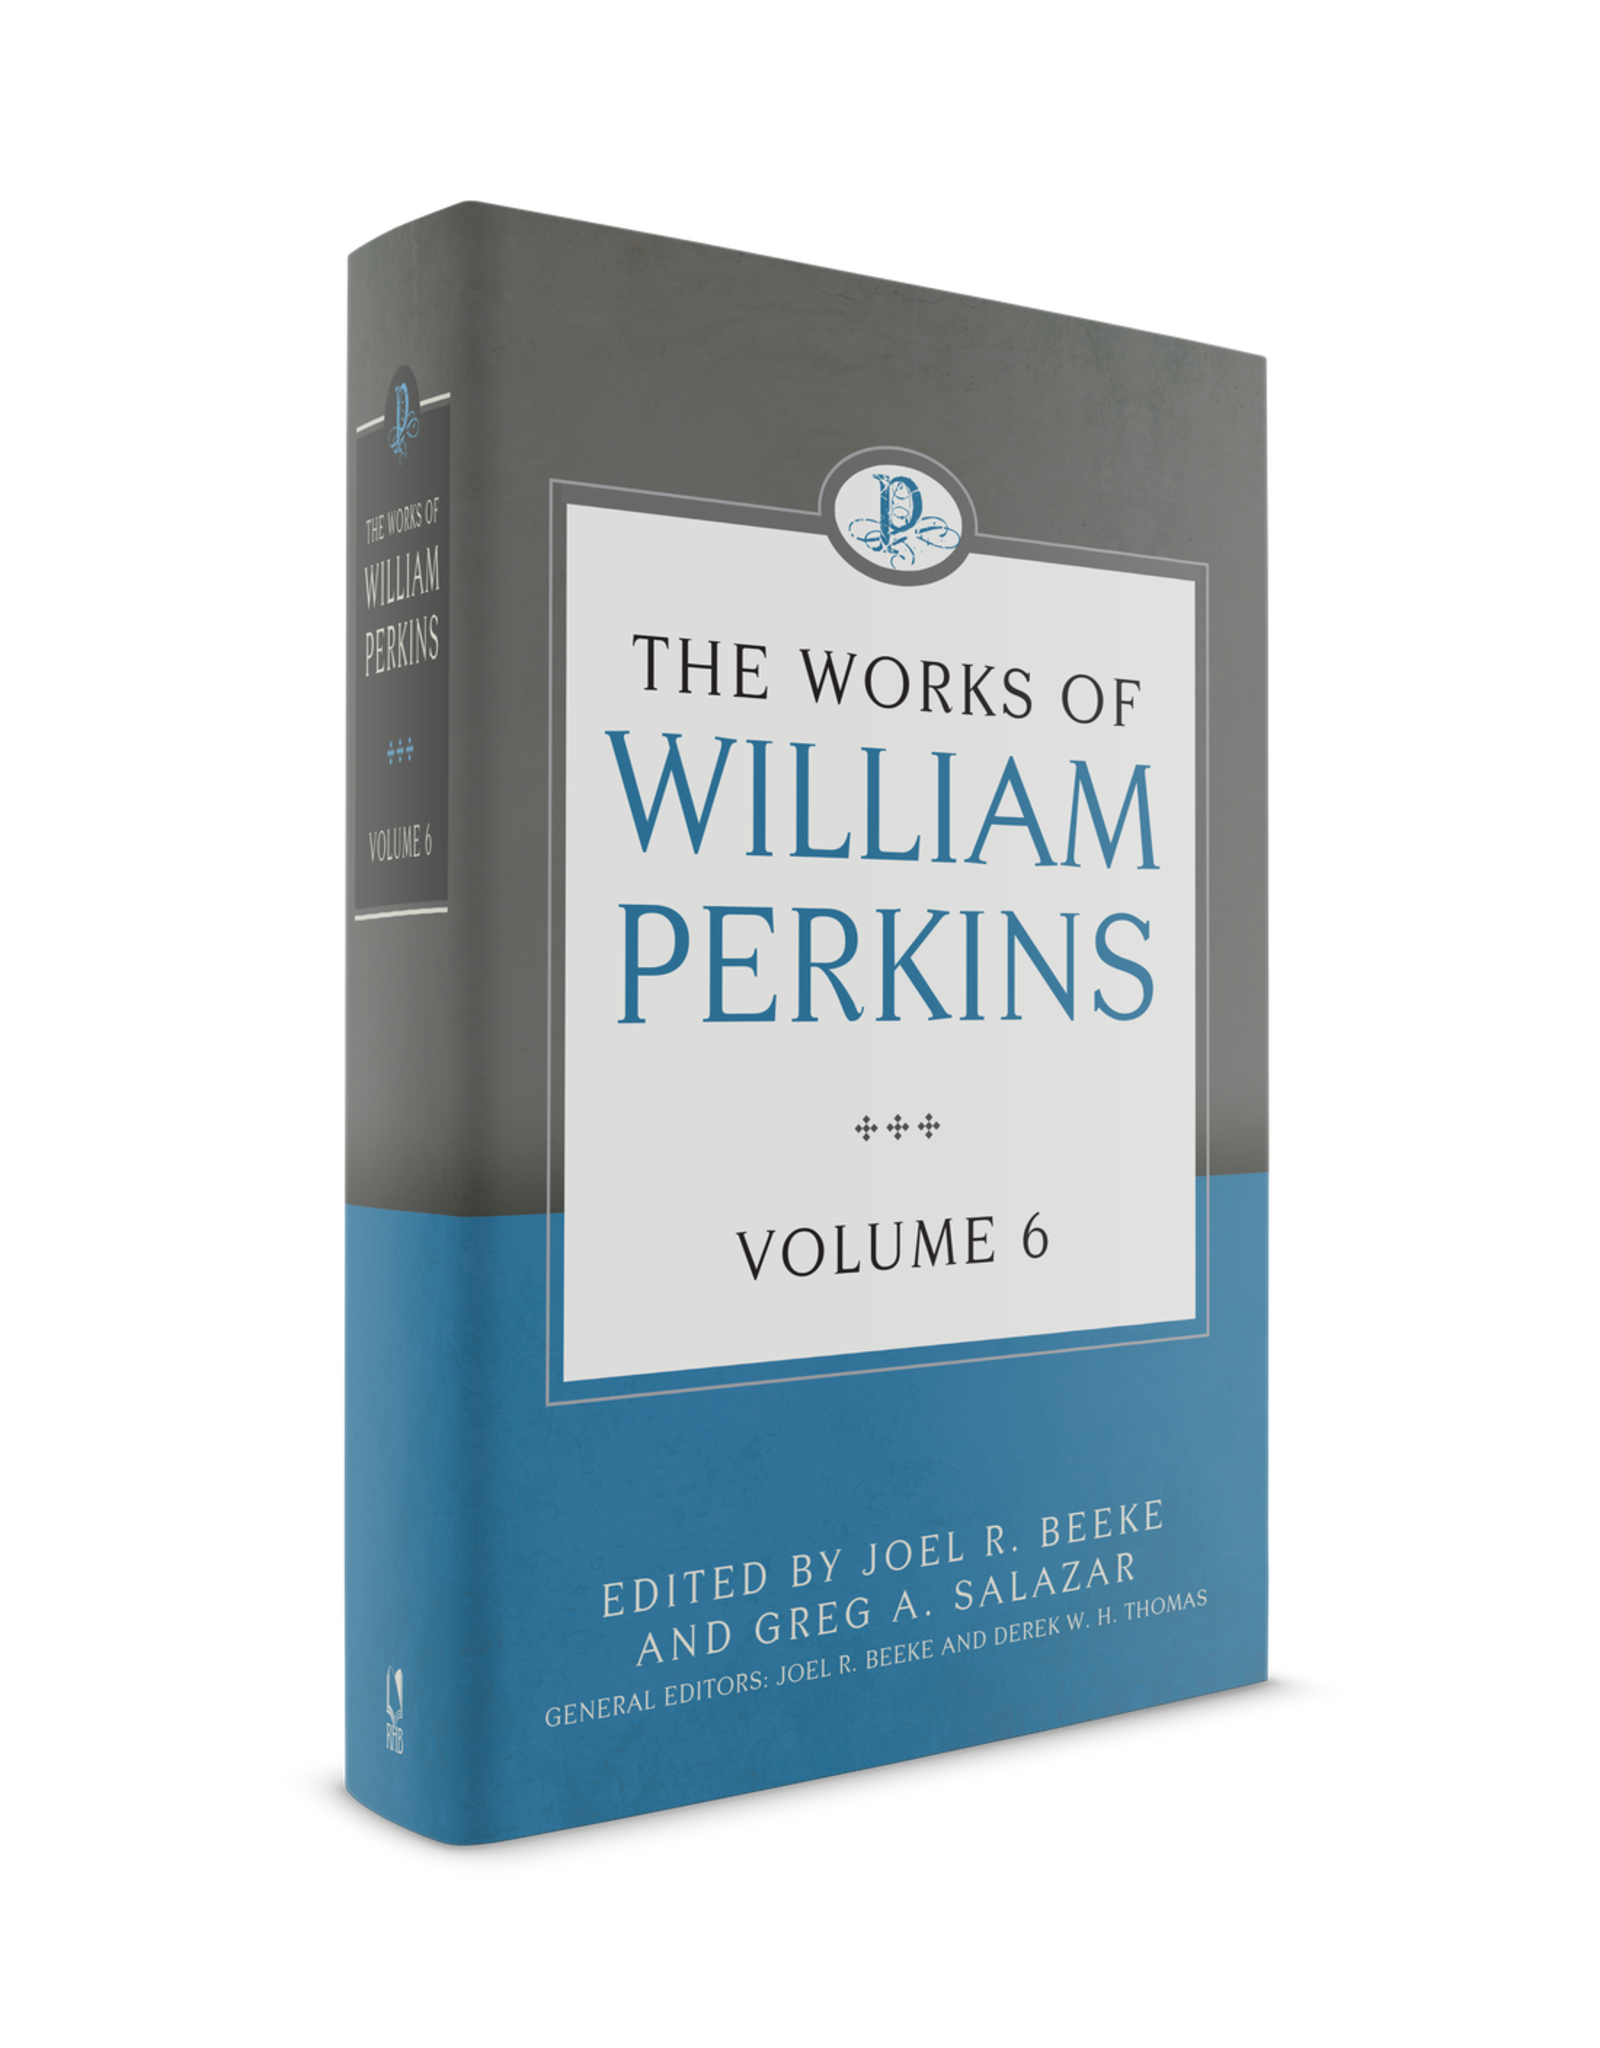 The works of William Perkins, Vol 6